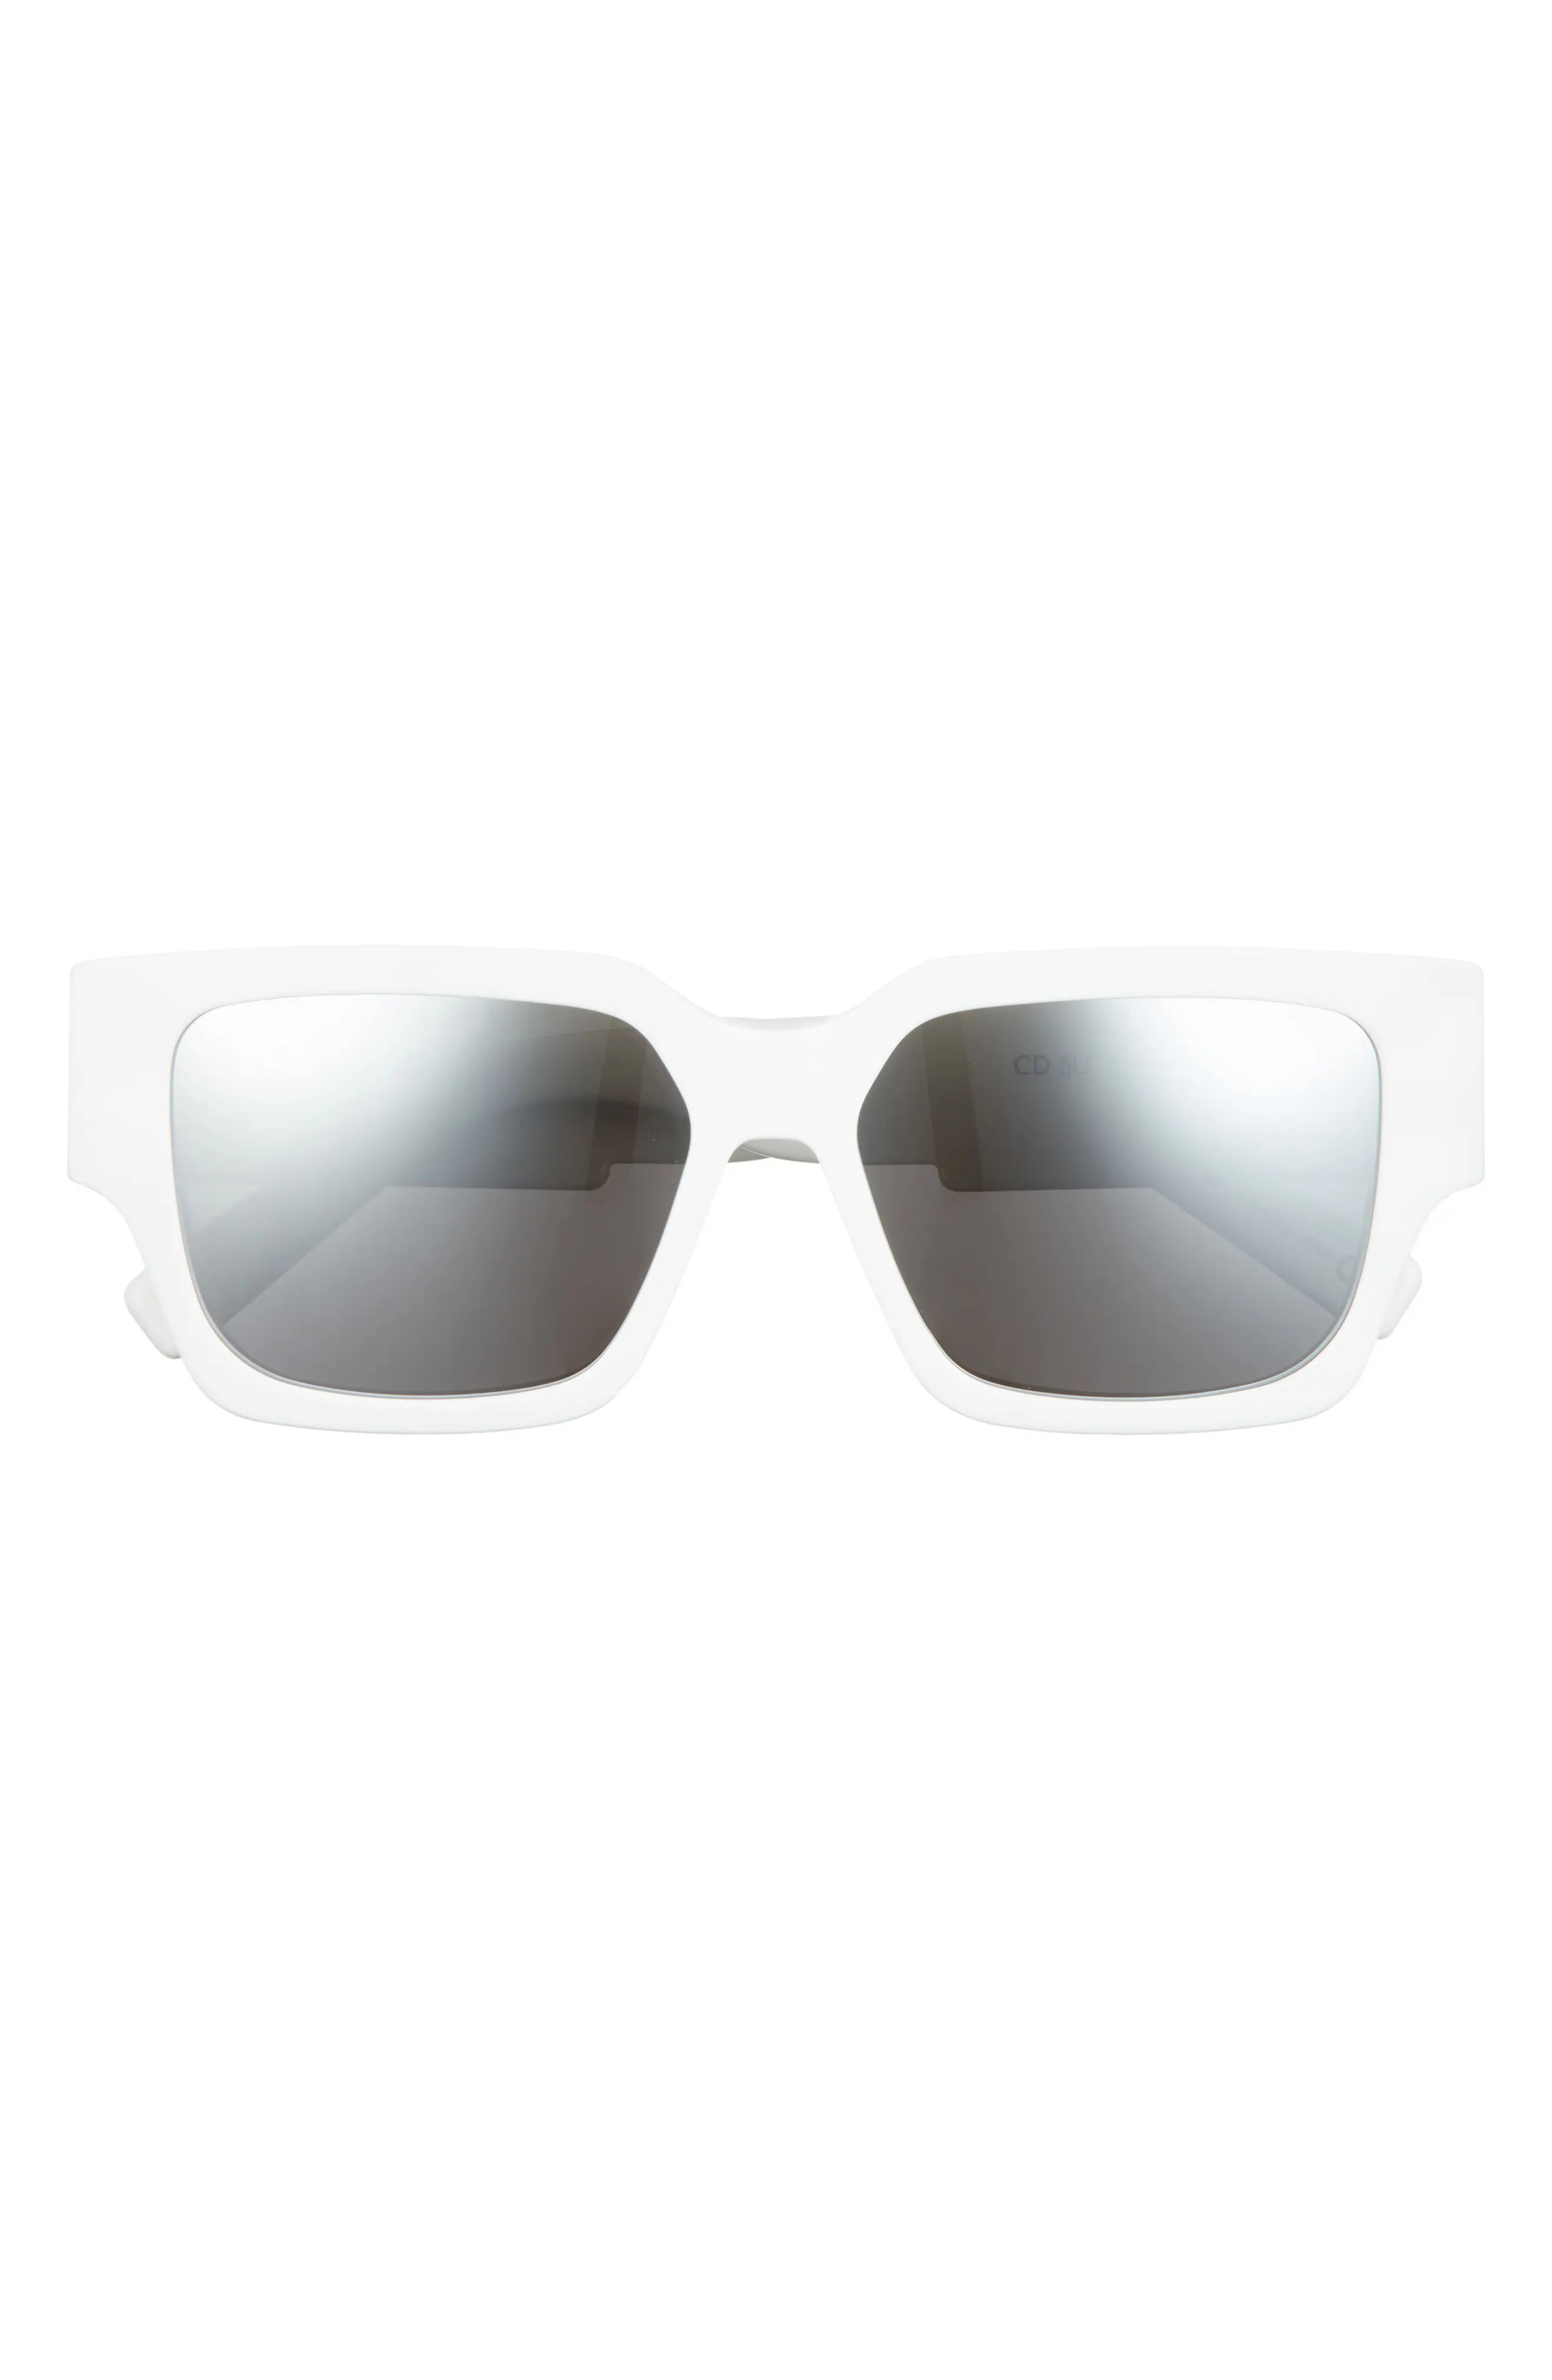 Christian Dior 55mm Rectangular Sunglasses in White/Other /Smoke Mirror at Nordstrom | Nordstrom